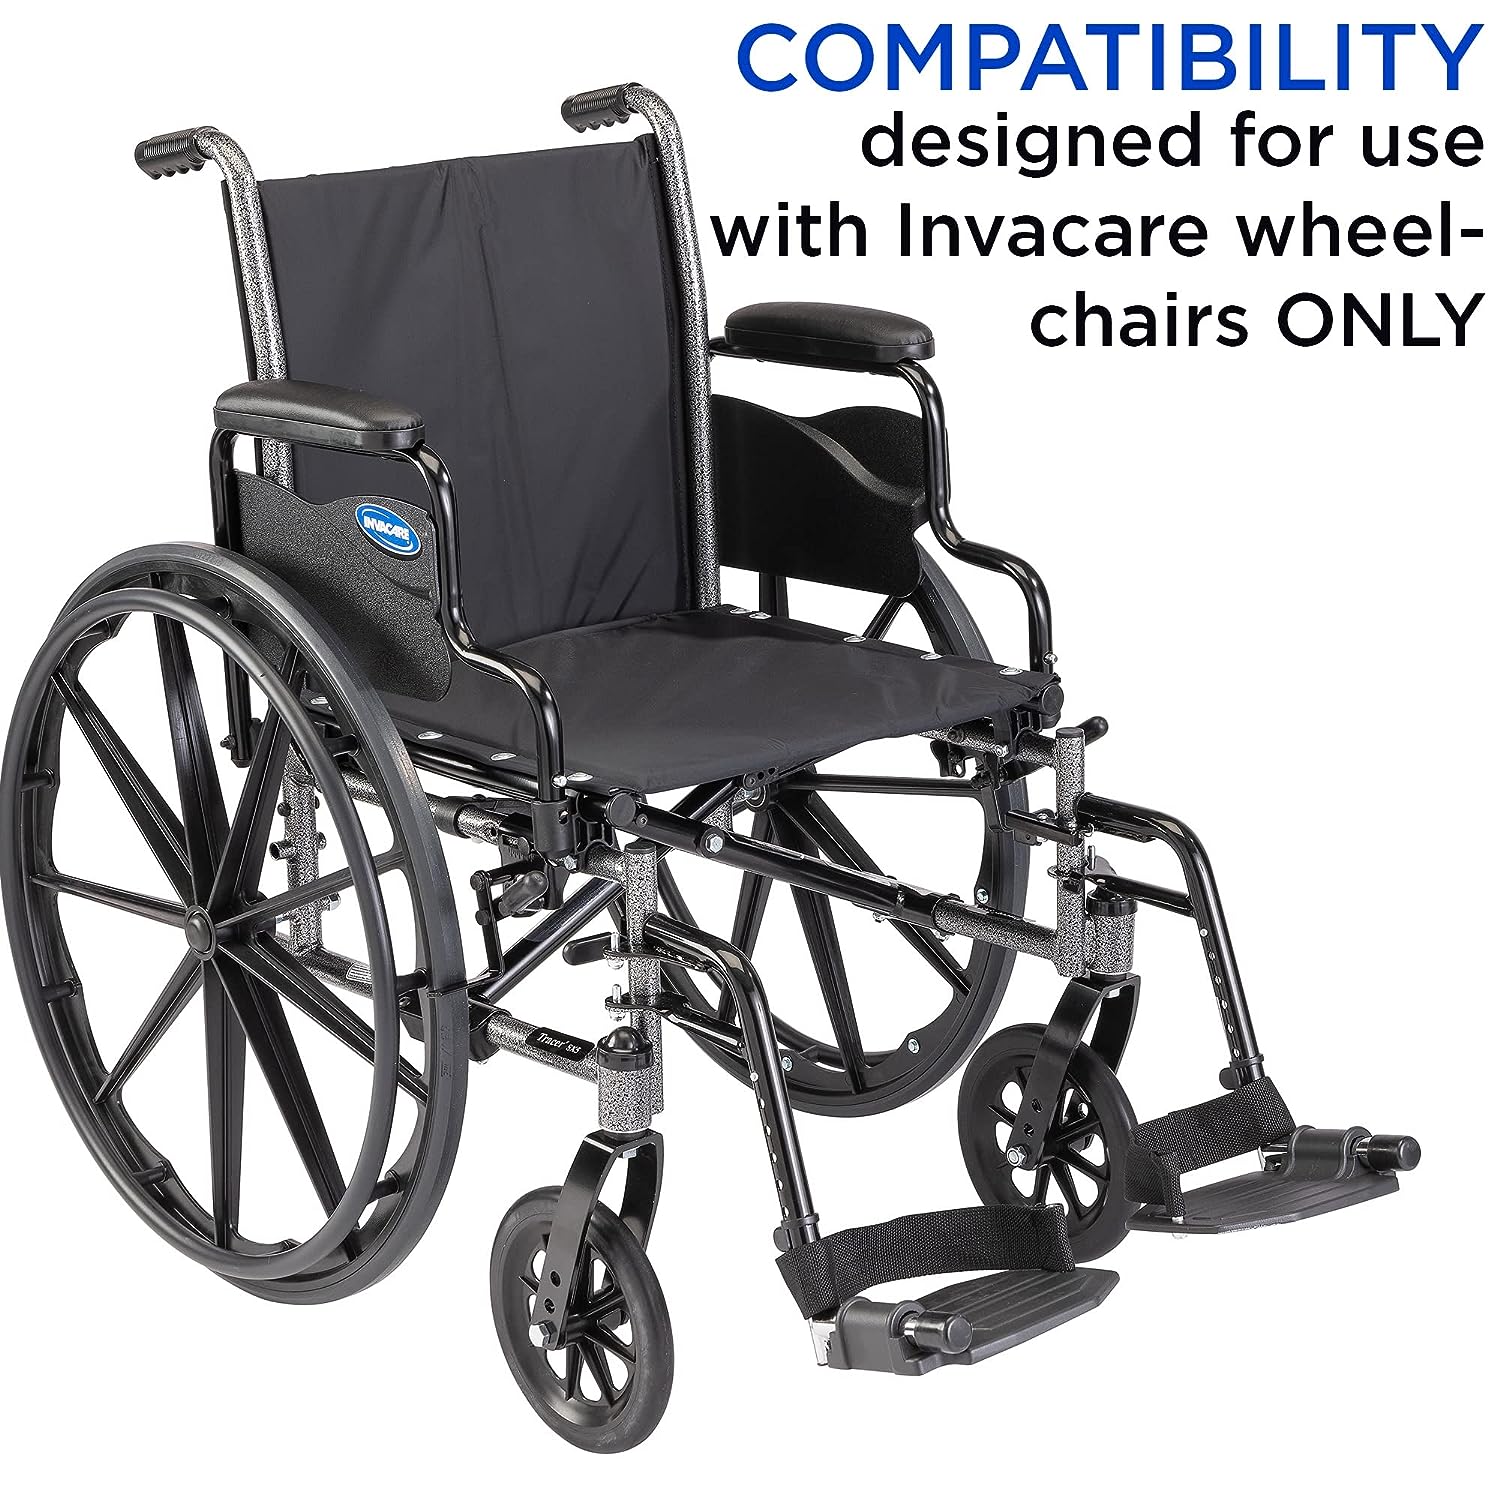 Item T93HCP, a pair of Invacare wheelchair hemi footrests with composite footplates with heel loops featured on an Invacare wheelchair to show the compatibility is designed for Invacare wheelchairs only. The image is against a white background.